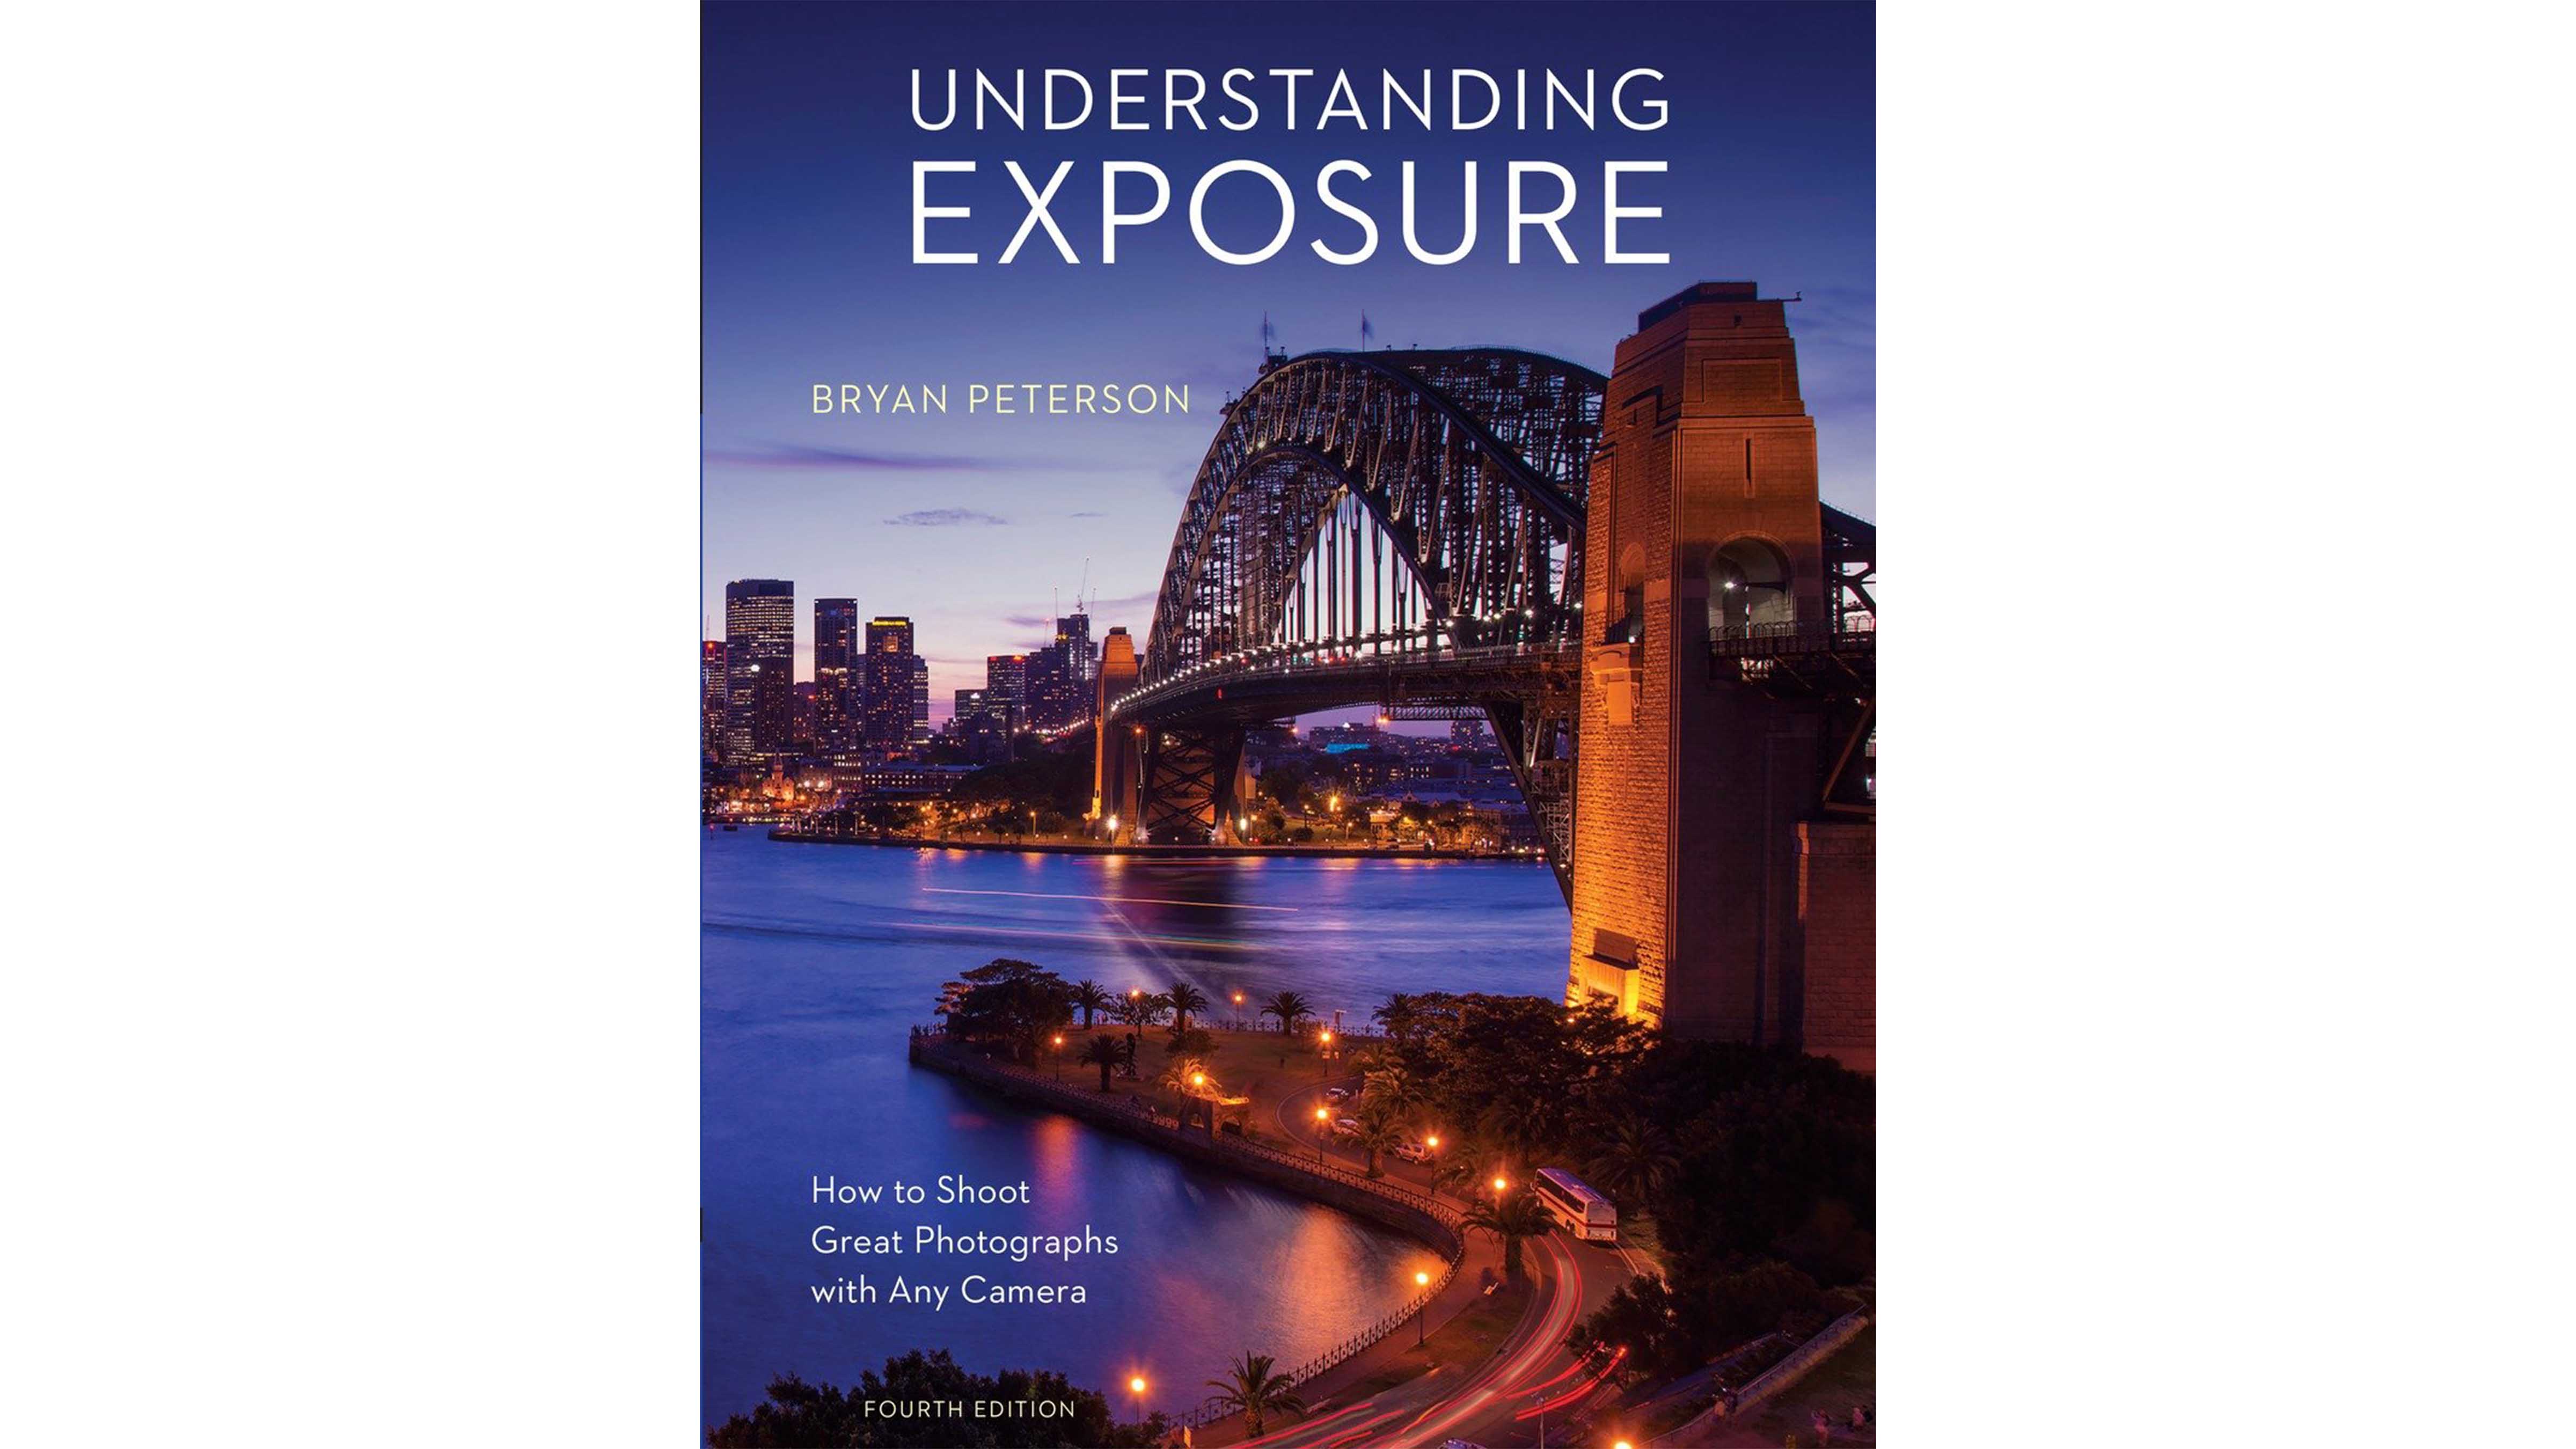 Cover of Understanding Exposure, one of the best books on photography